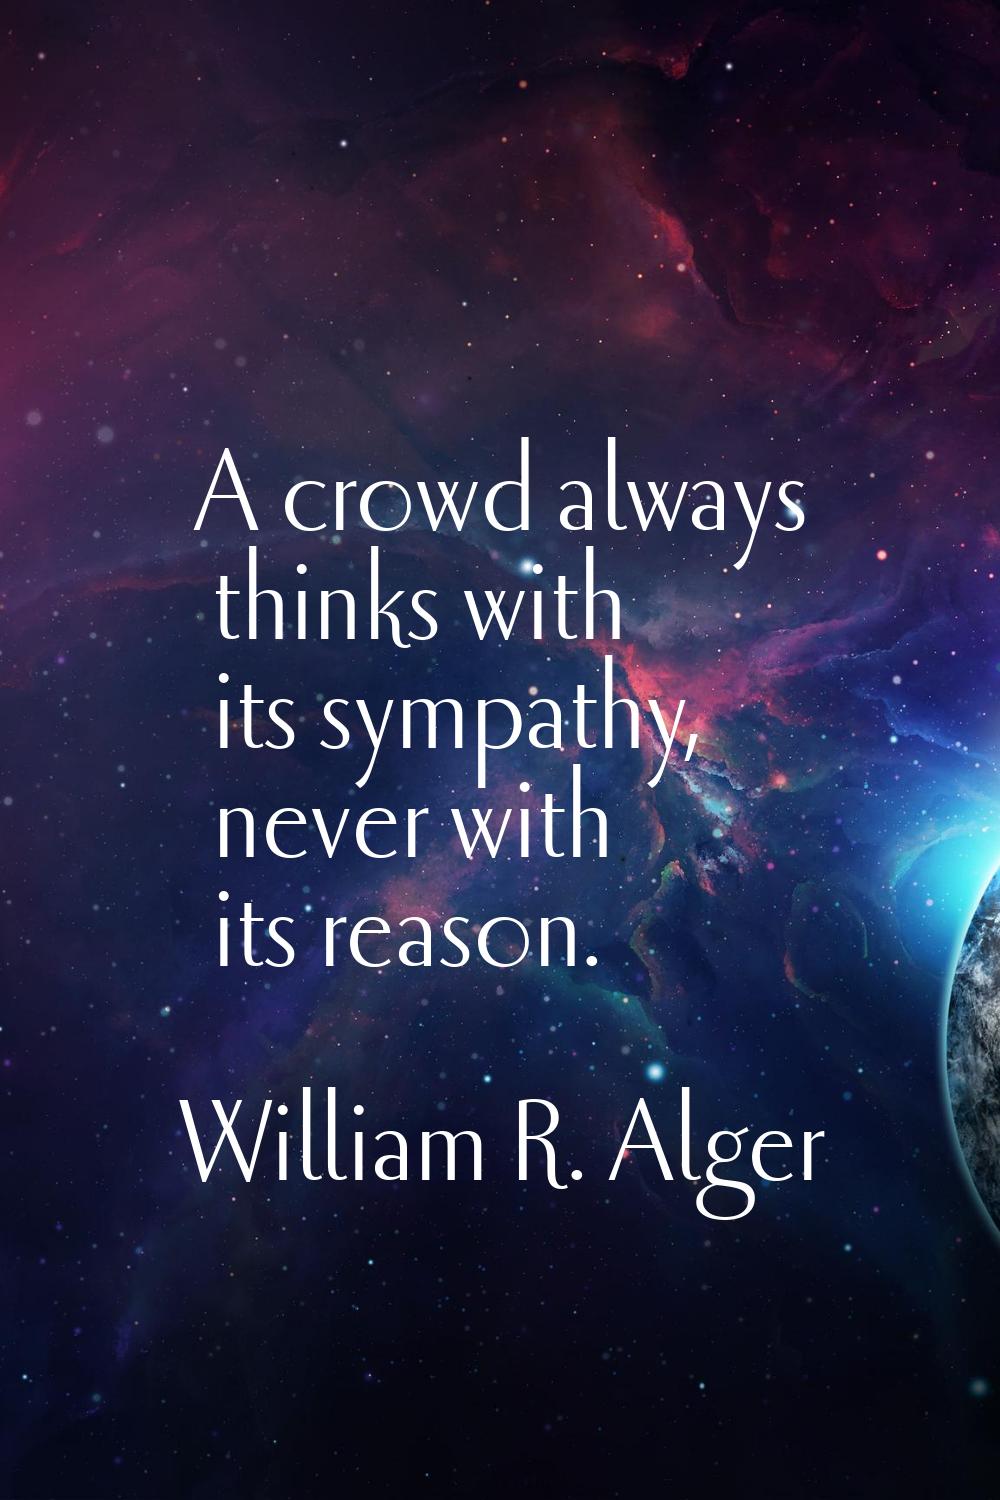 A crowd always thinks with its sympathy, never with its reason.